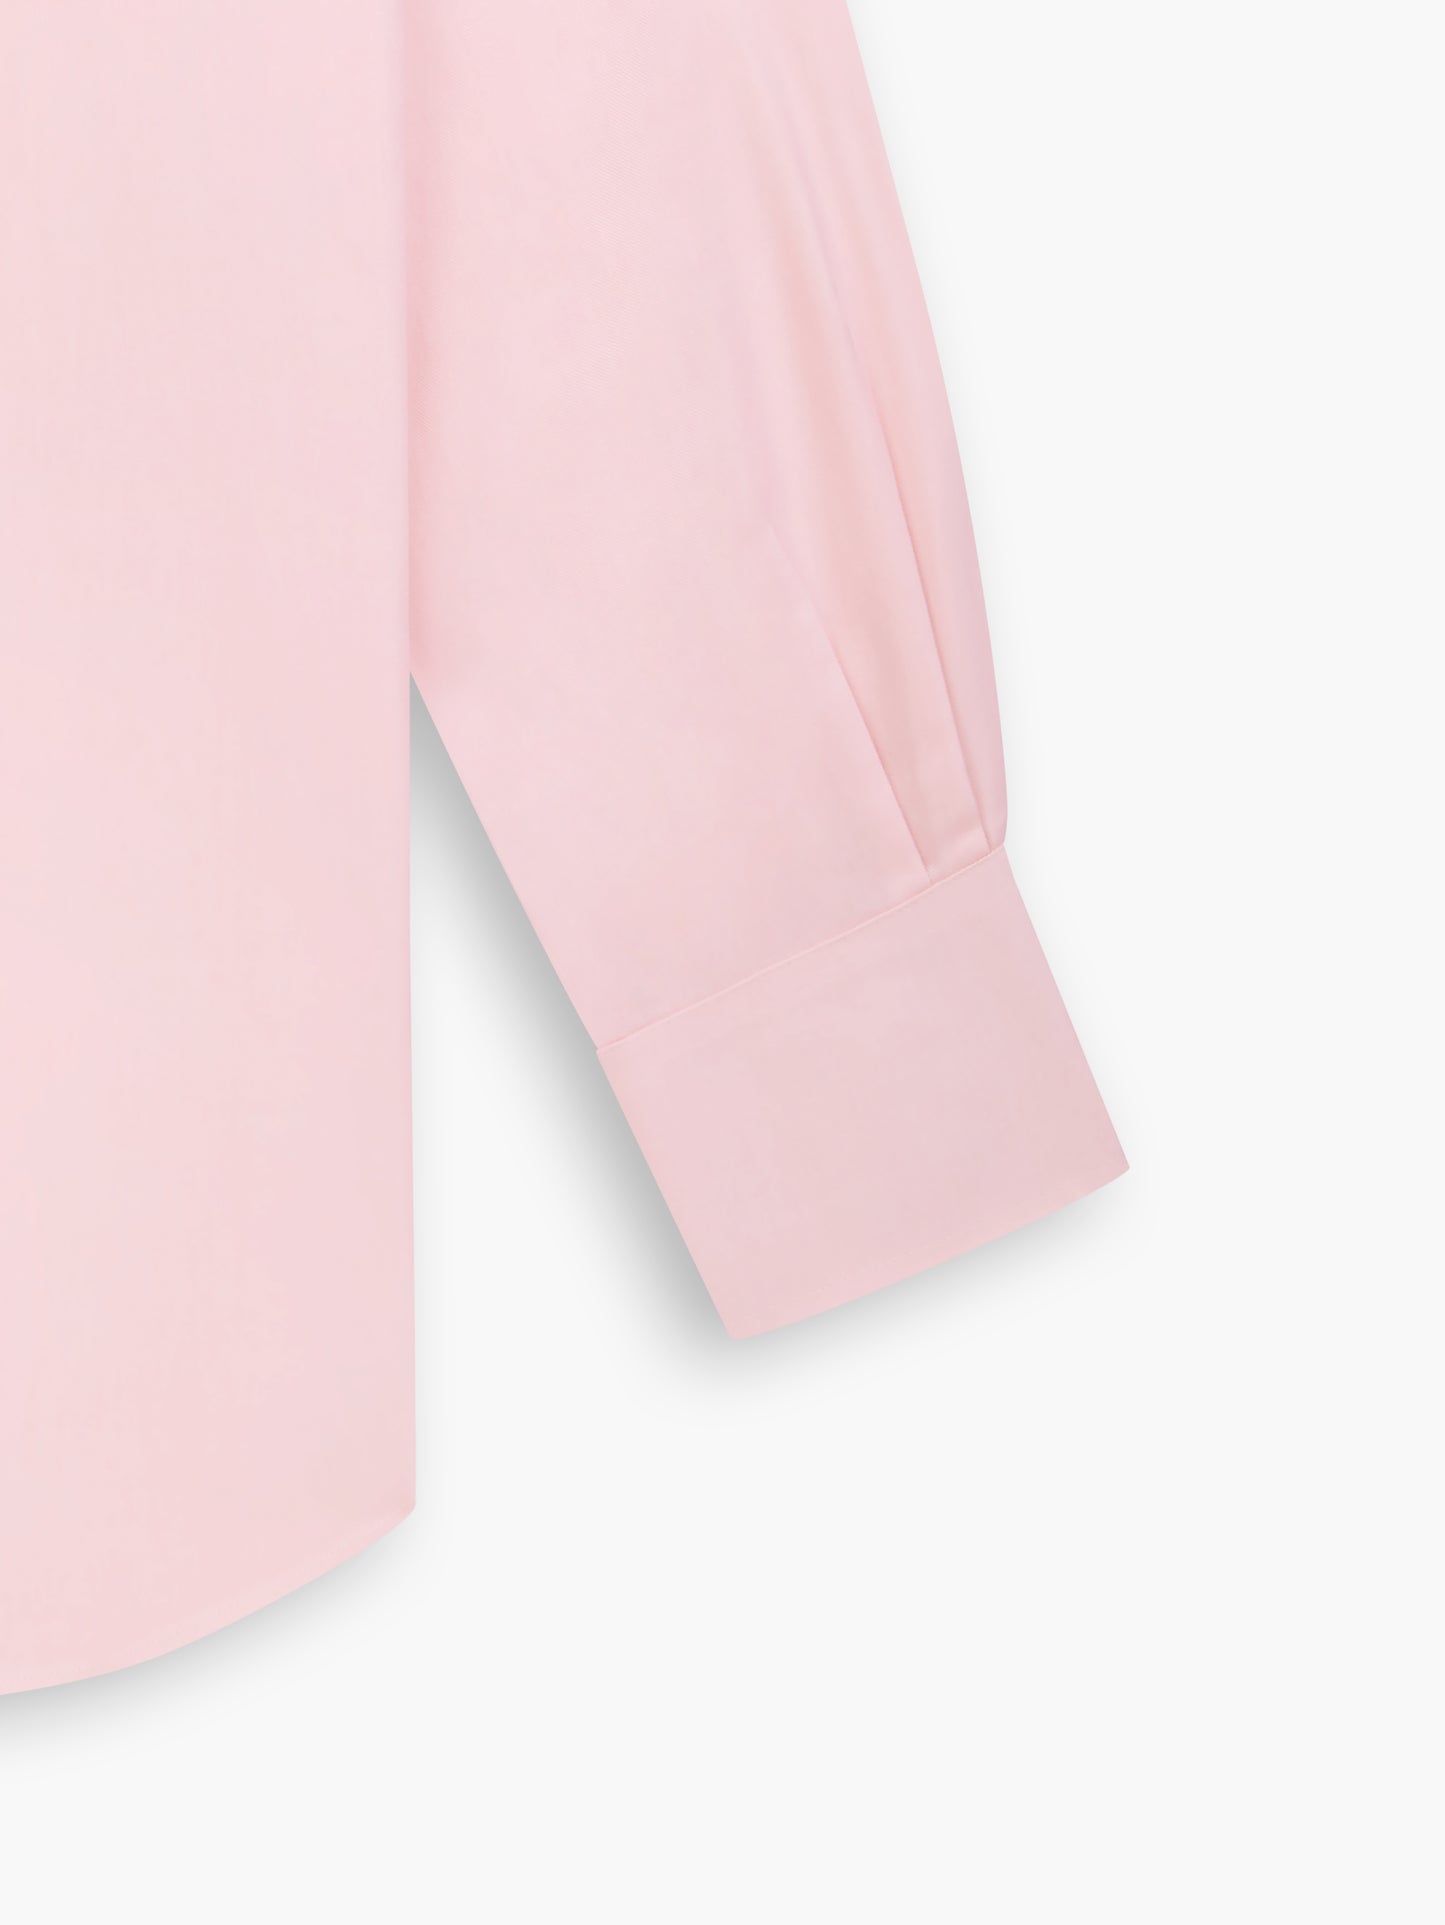 Non-Iron Pink Twill Fitted Single Cuff Classic Collar Shirt